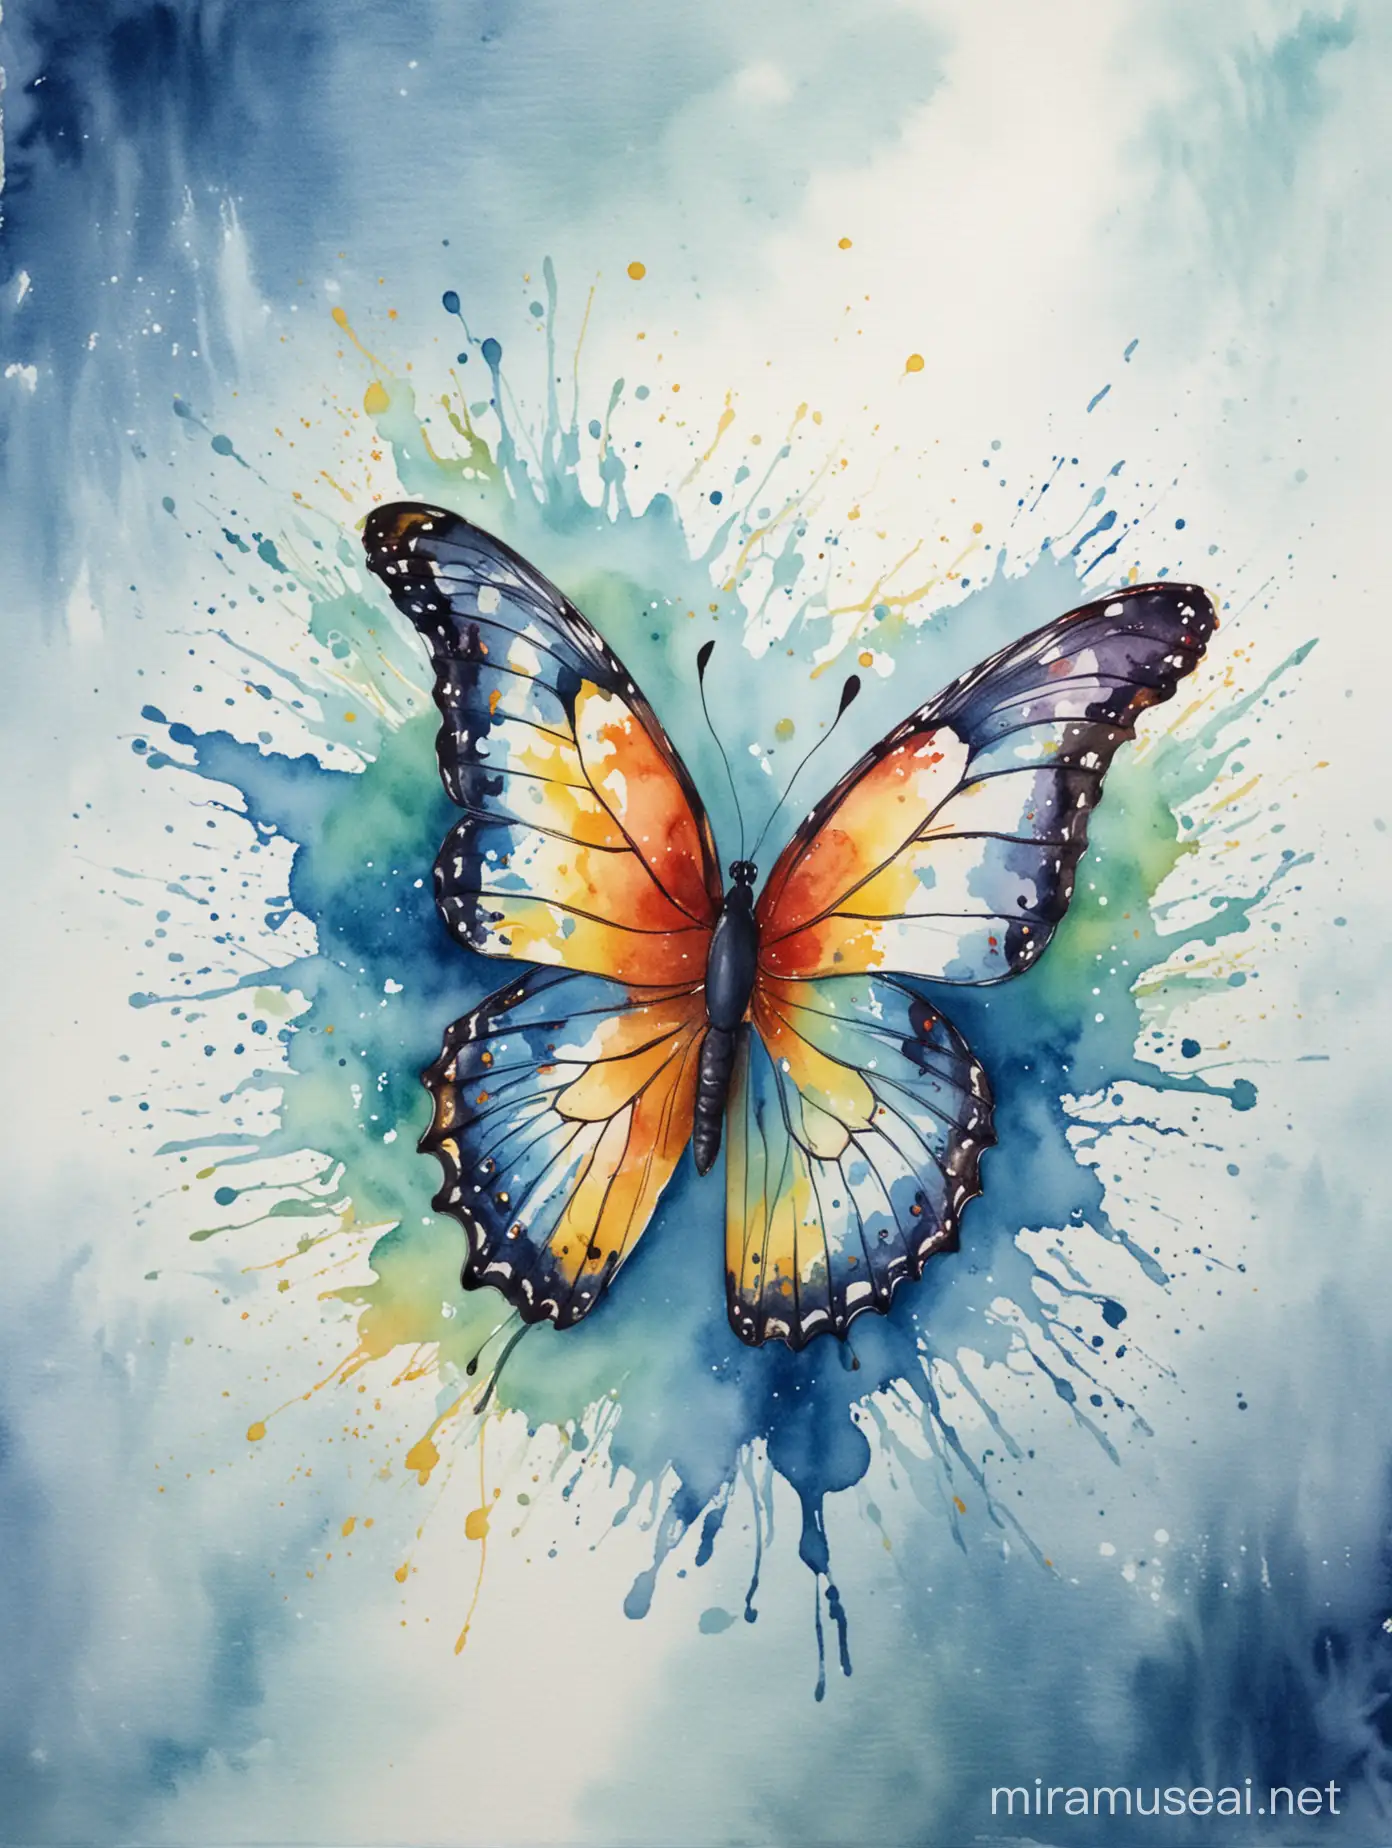 a water color image with a abstract subject of autism and butterfly